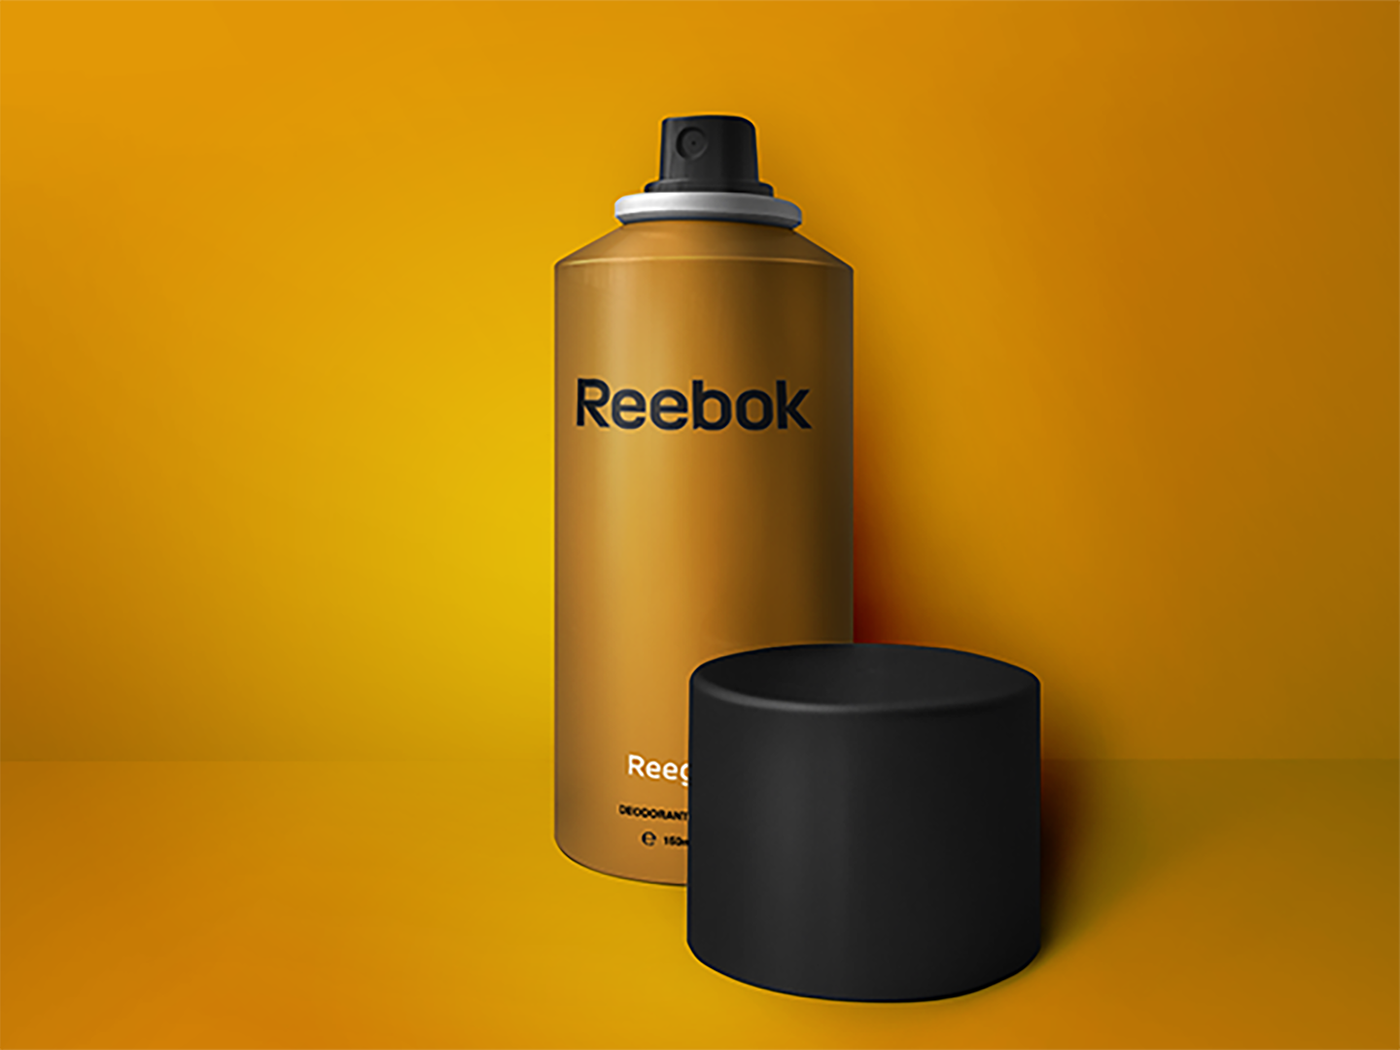 Reebok personal care  deo Product graphics DEO